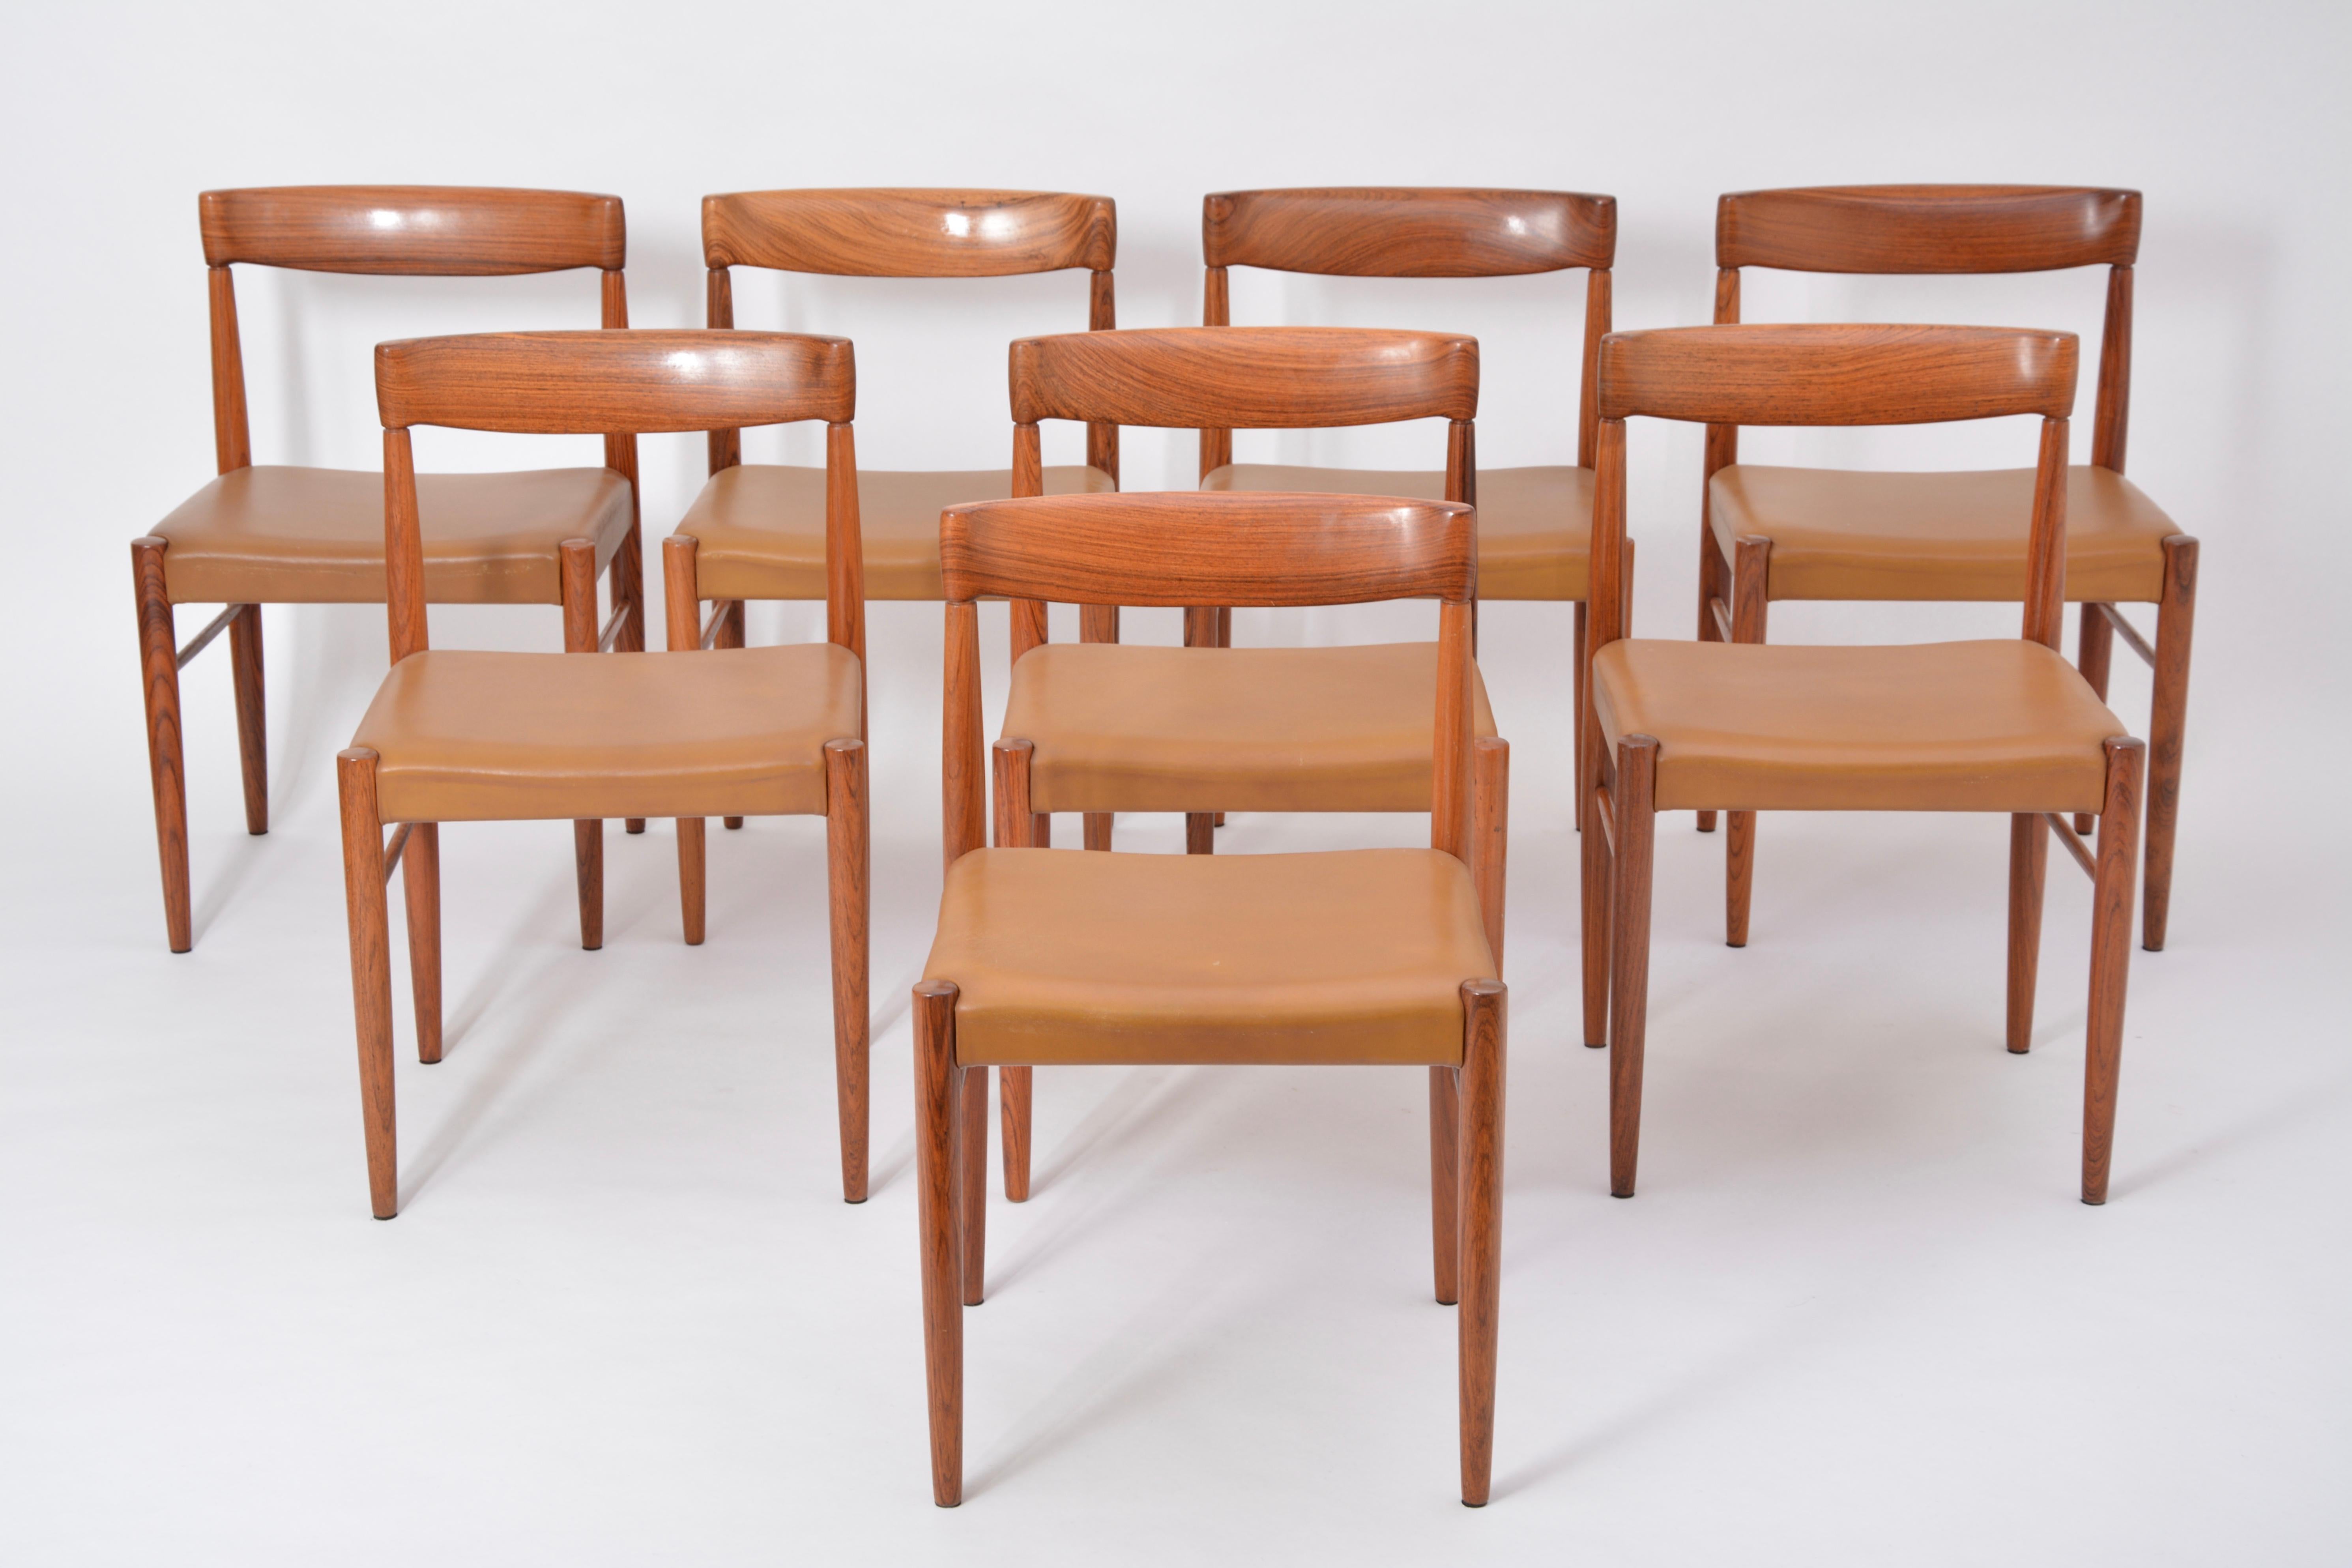 These dining chairs were designed by H. W. Klein and manufactured by Bramin in the 1960s in Denmark. The frames are made of rosewood and the seats are upholstered in light brown leather.